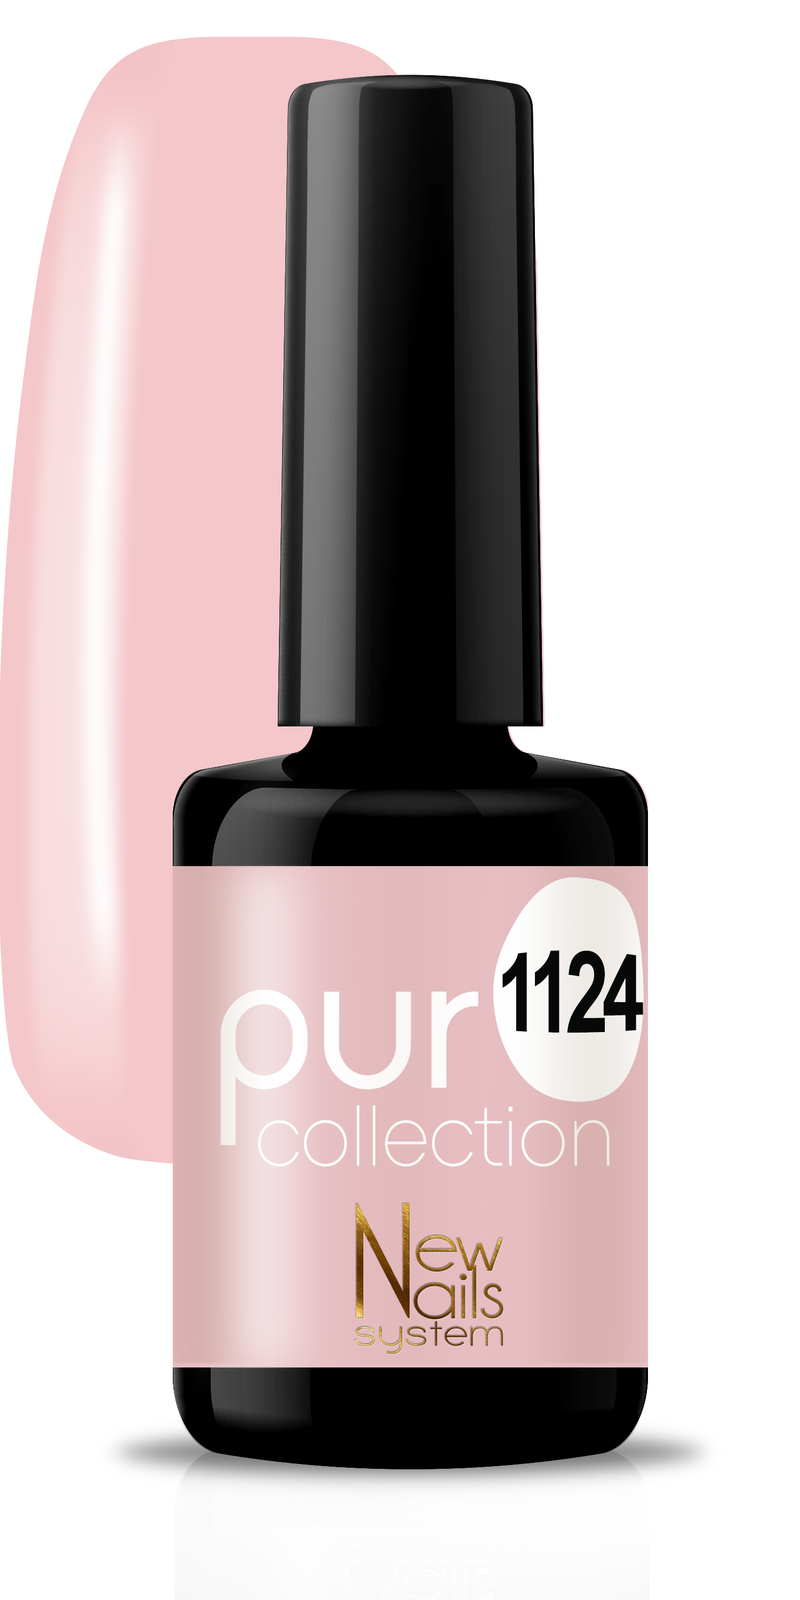 Puro collection Scent of Roses 1124 polish gel color 5ml